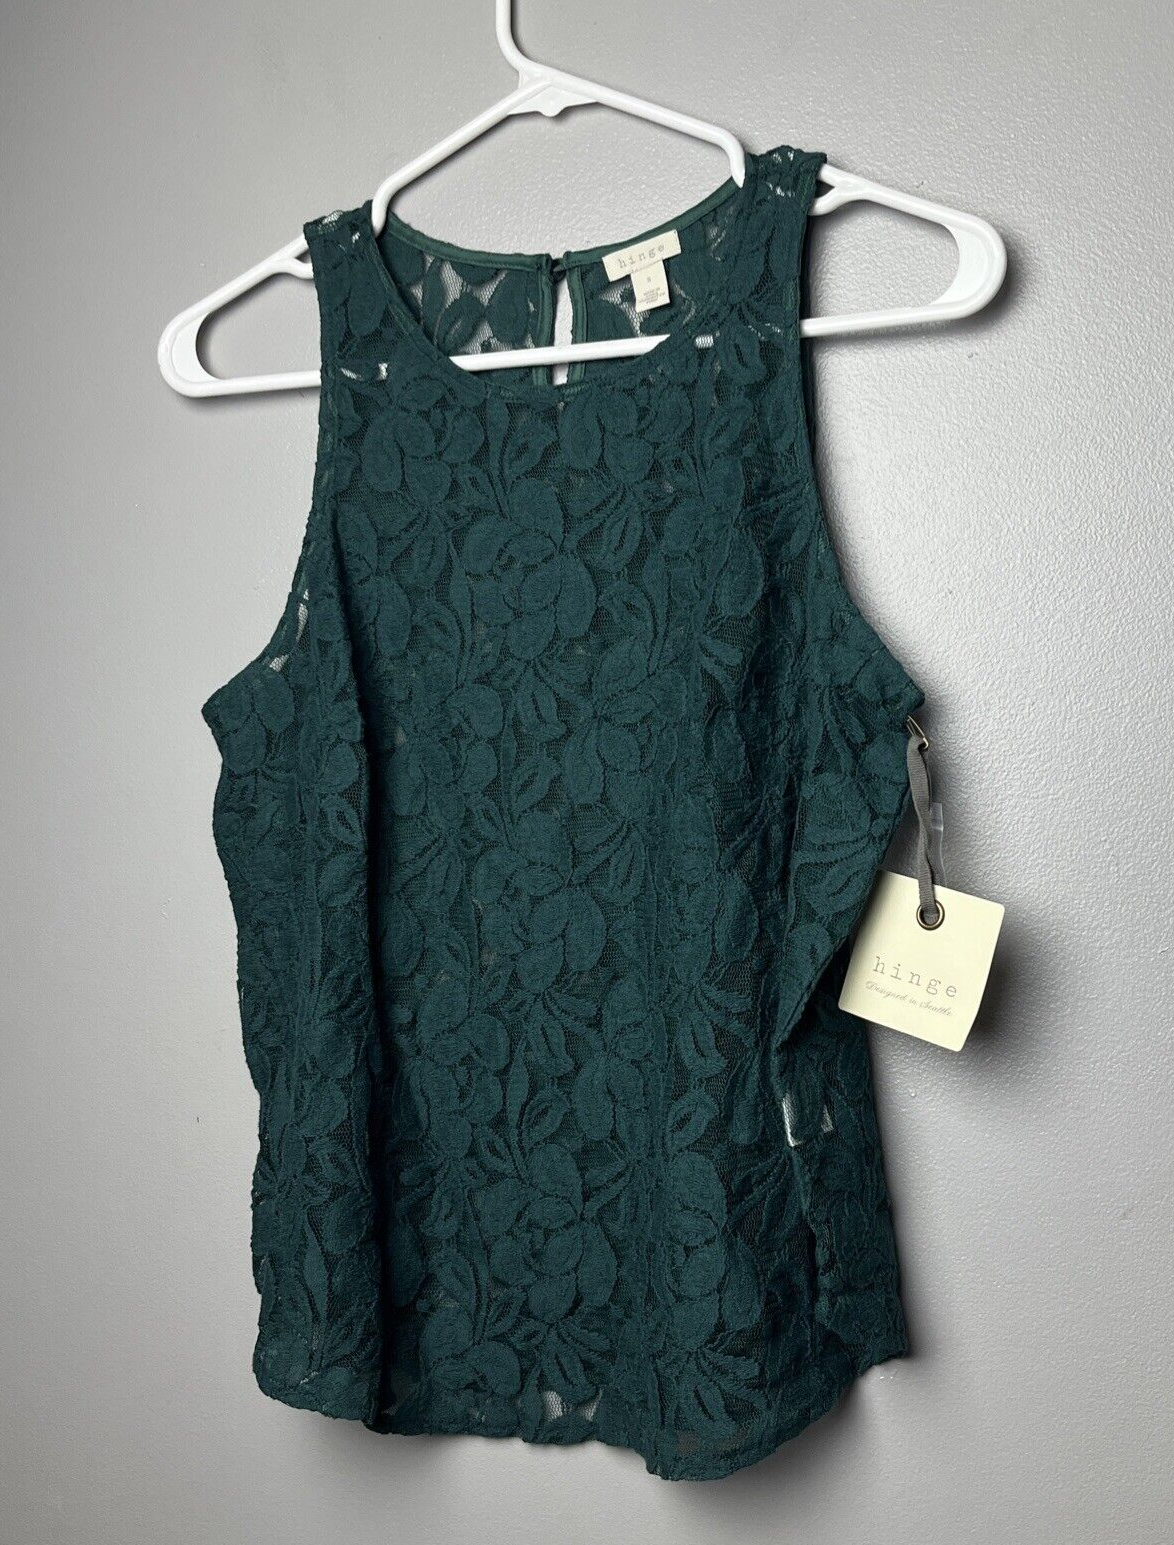 Hinge Women's Green bug Lace Tank Top Size S $48